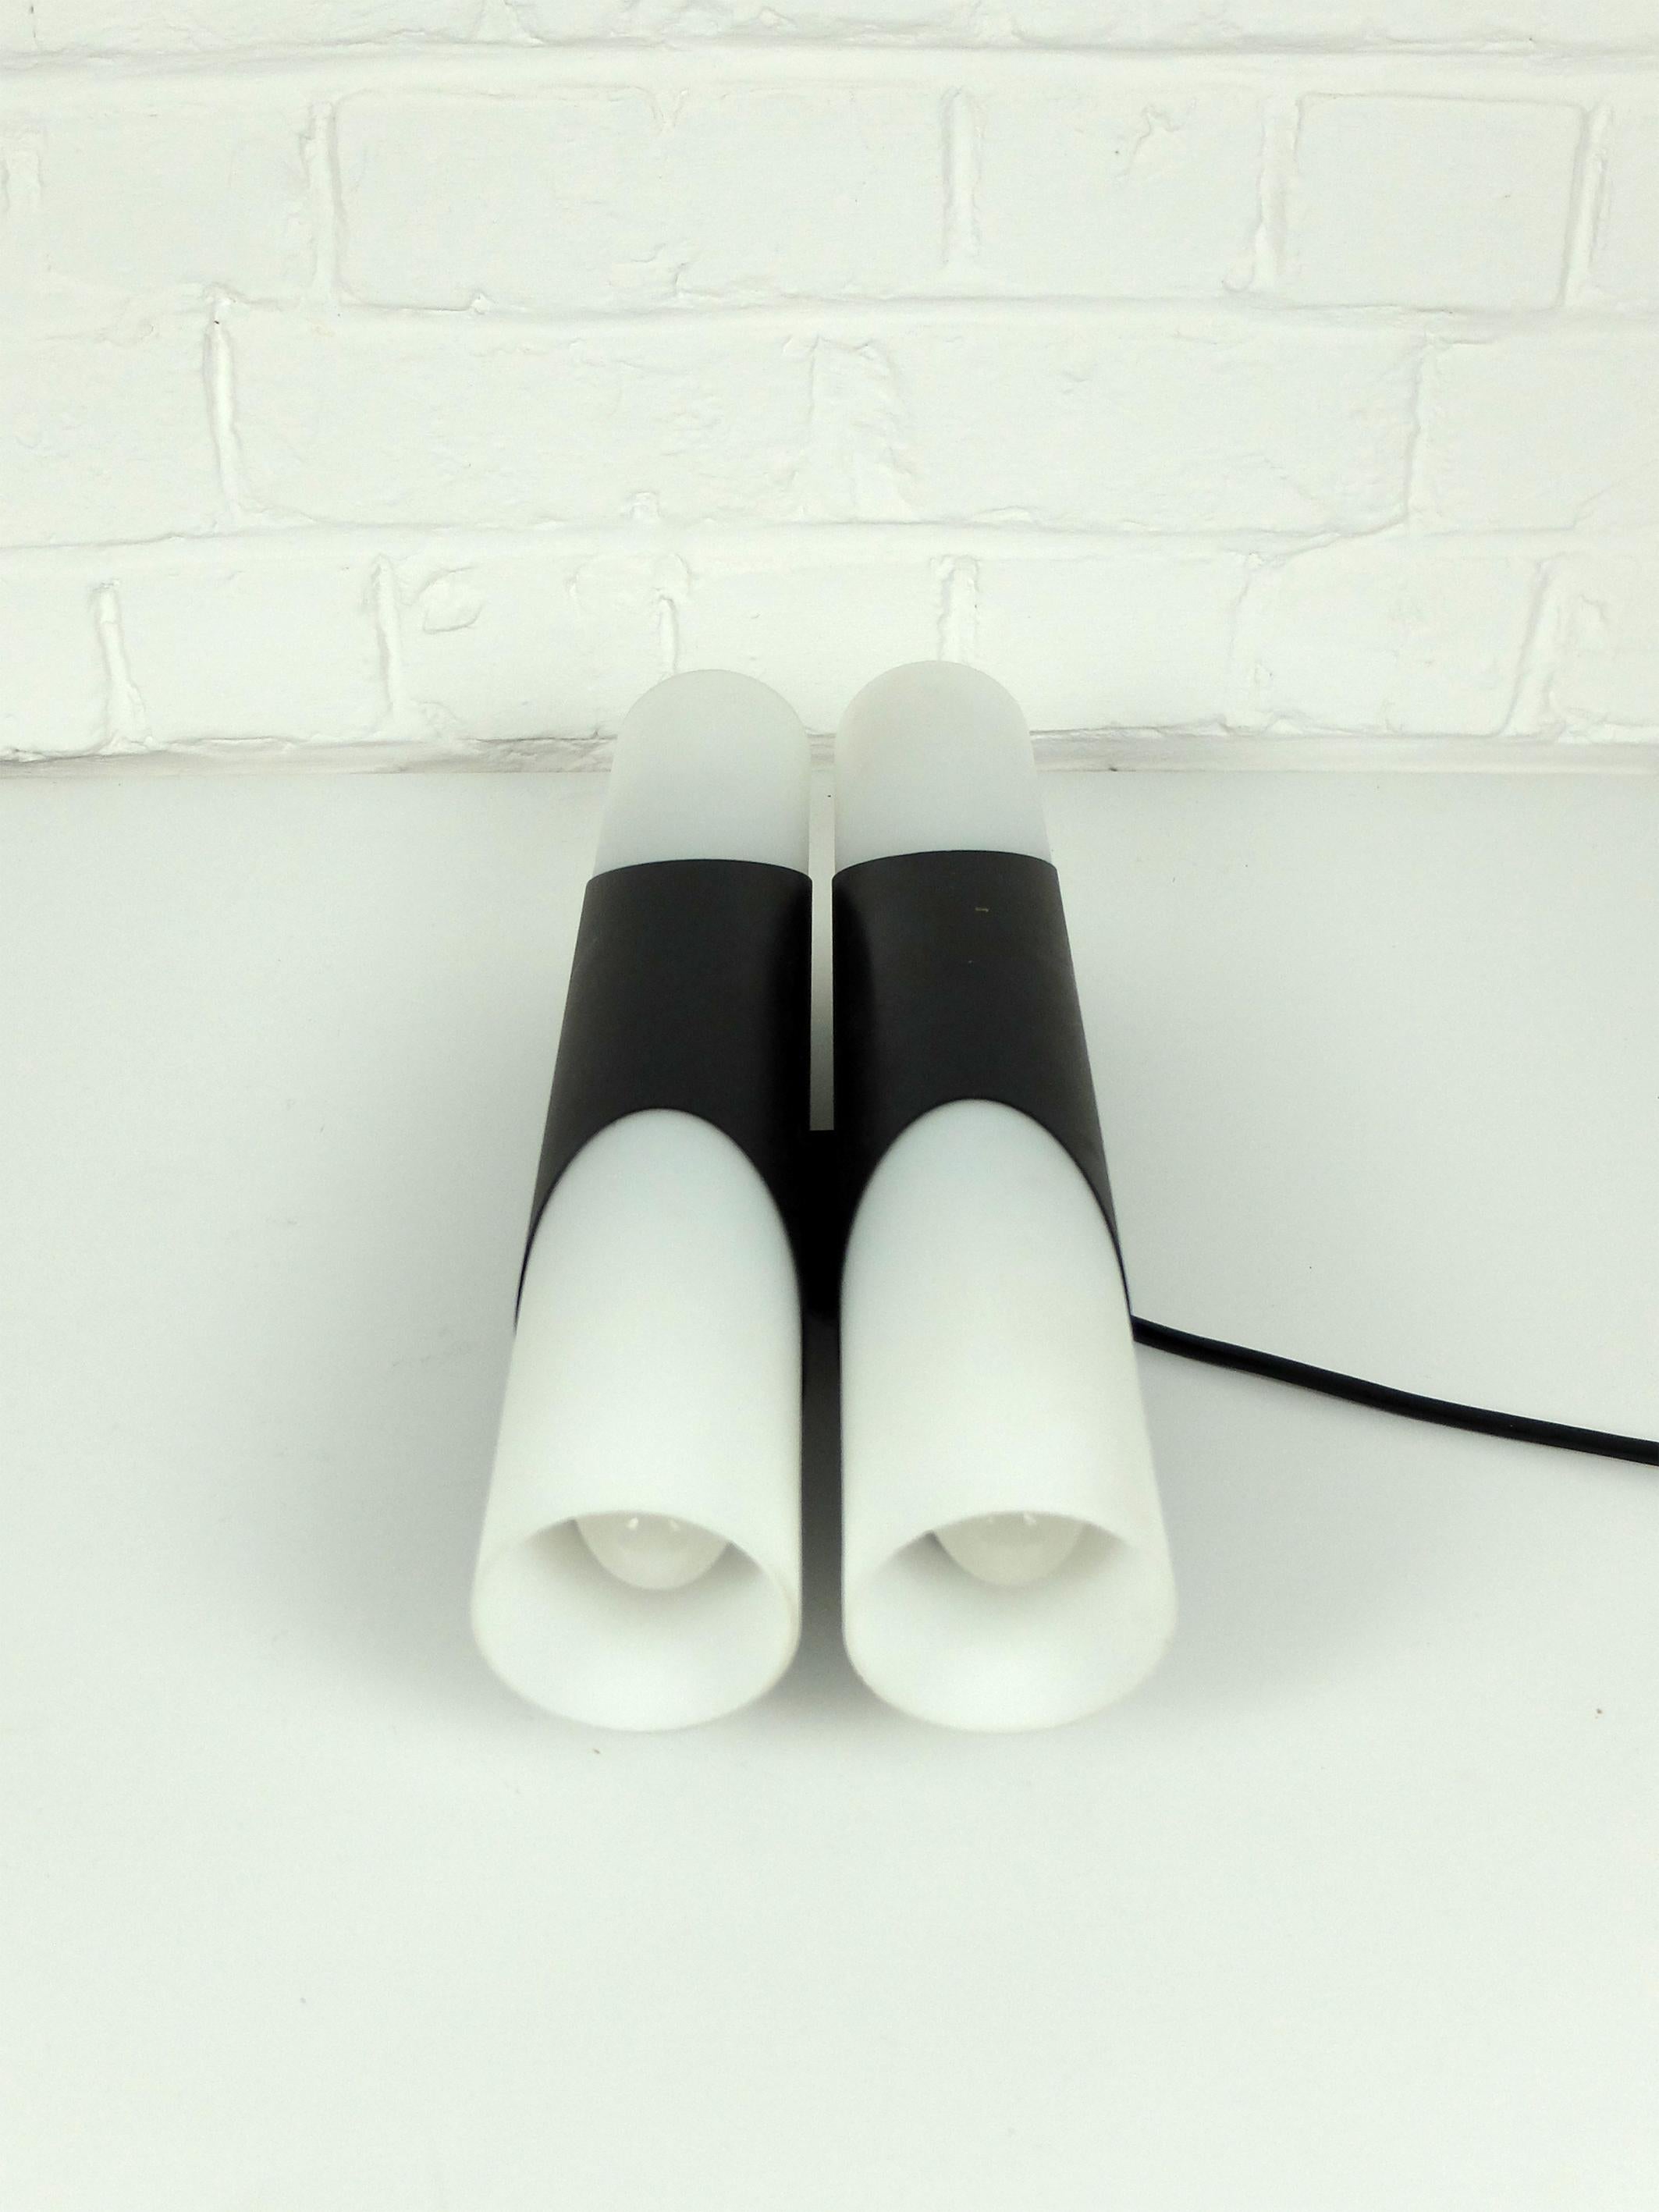 Double Glass Wall Light in black by Rolf Krüger for Paul Neuhaus, Germany 1970 For Sale 3